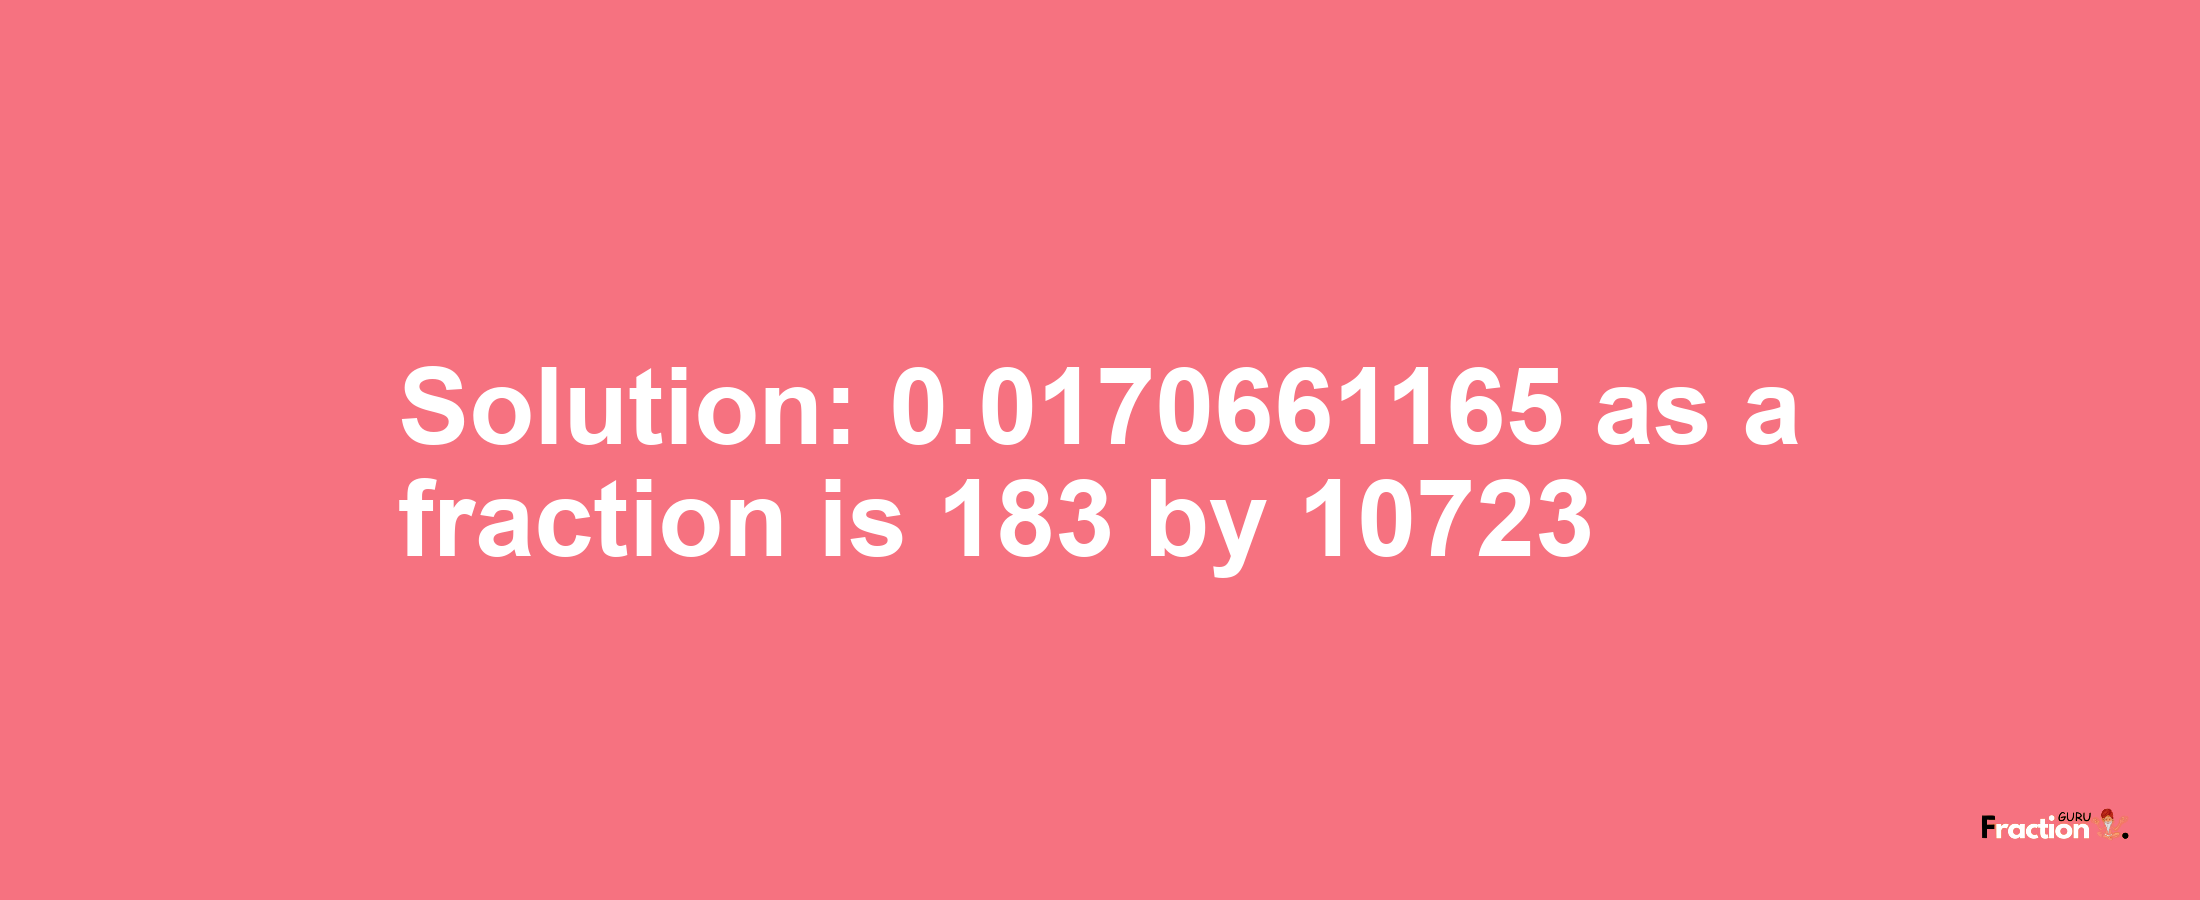 Solution:0.0170661165 as a fraction is 183/10723